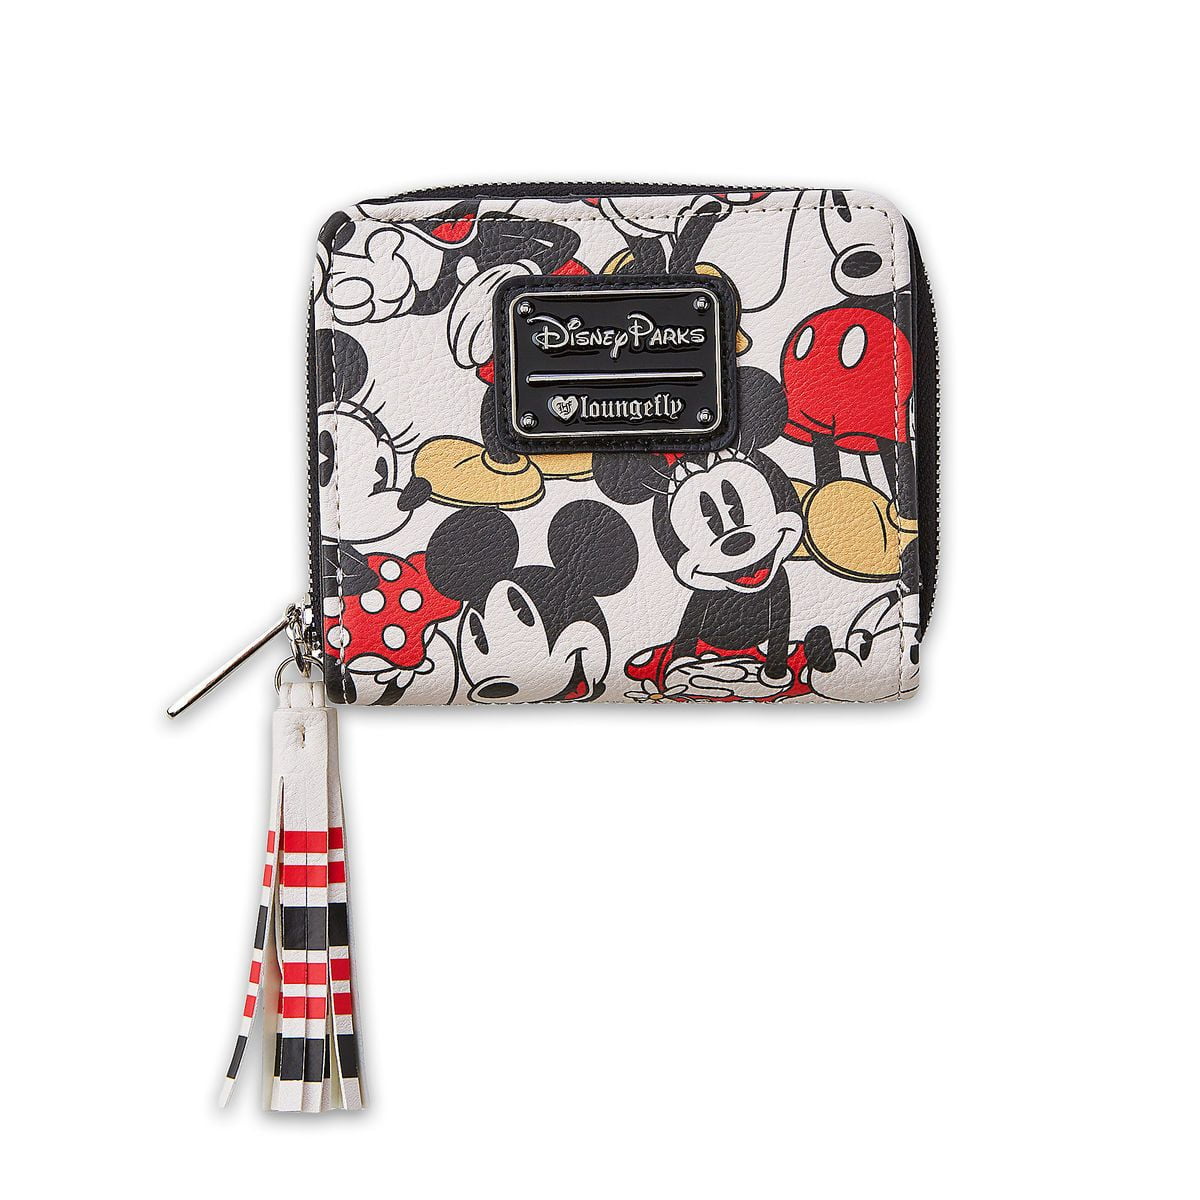 Loungefly Disney Minnie Mouse Cream Wallet NEW IN STOCK 